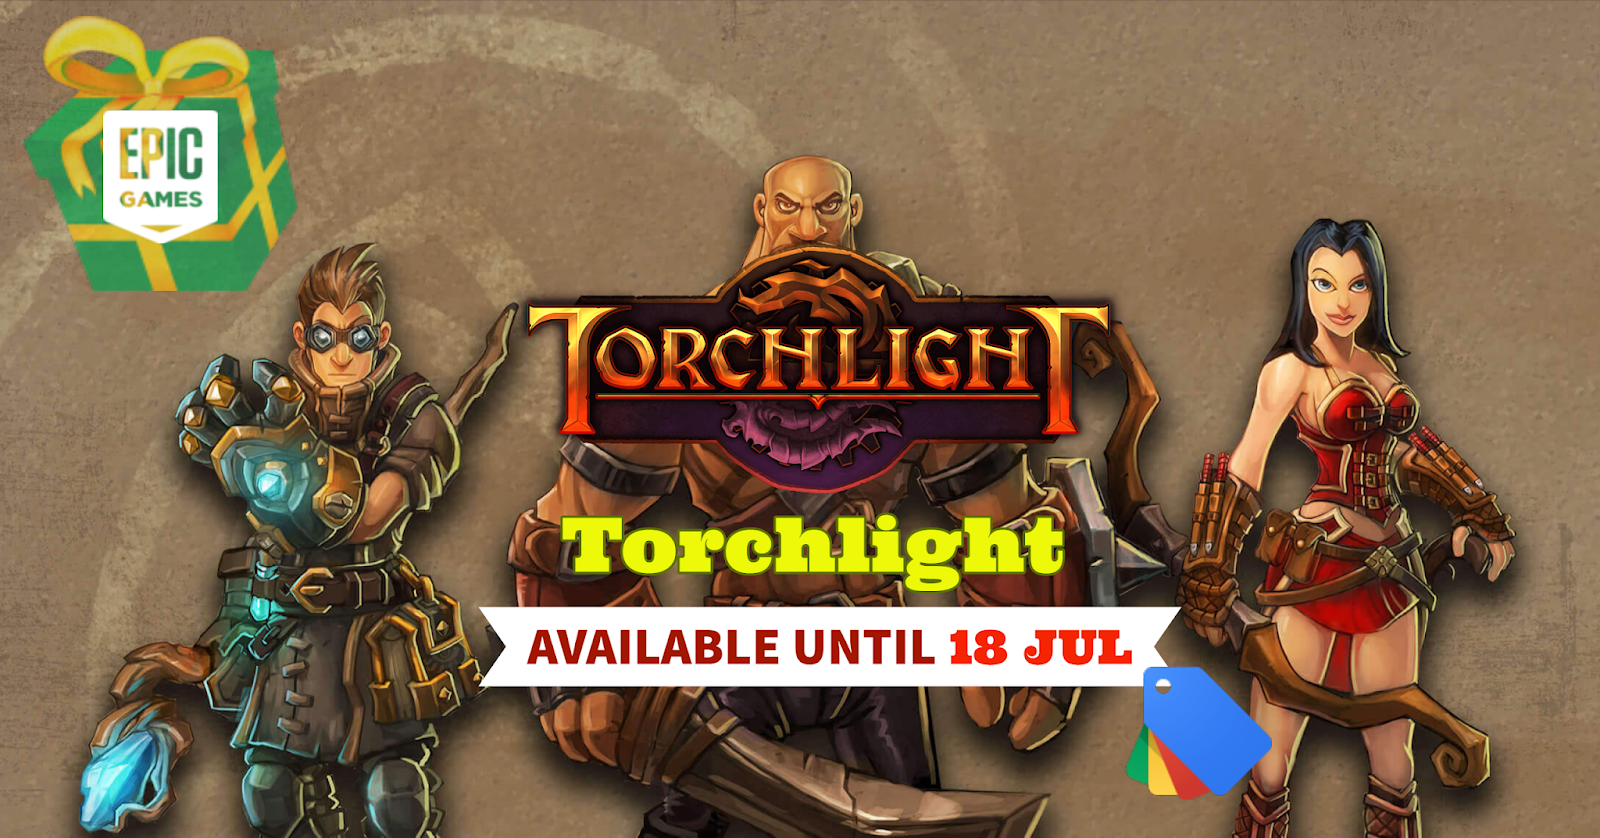 Giveaway: Torchlight Available for Free – Until Jul 18